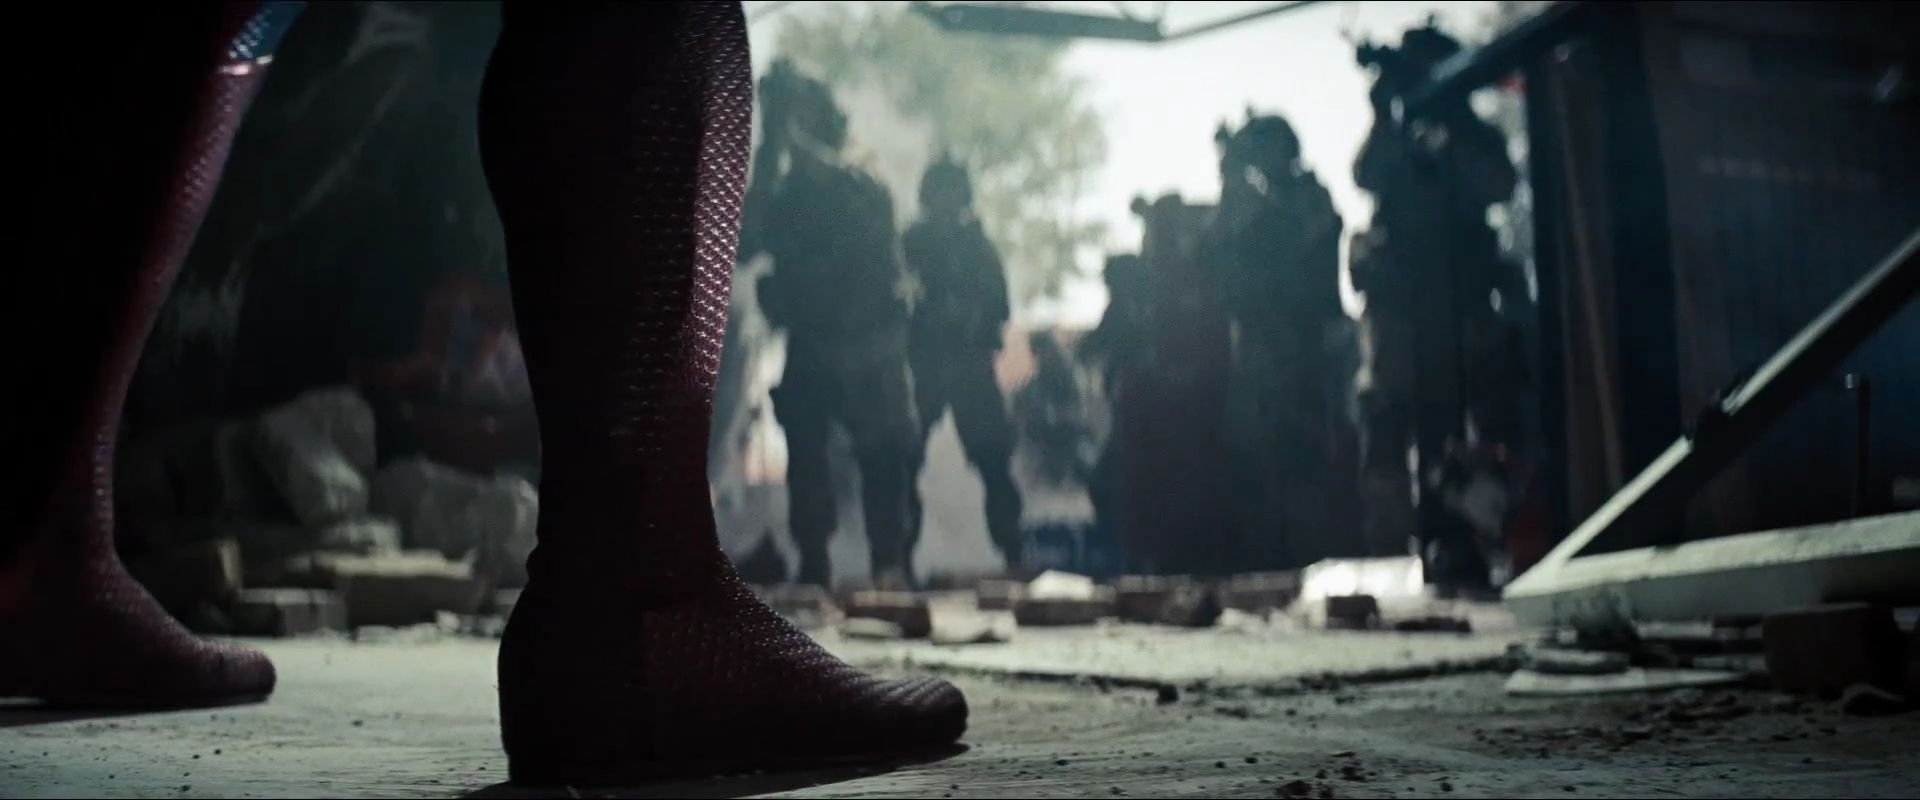 Man of Steel Trailer Images - Superman Faces the Army